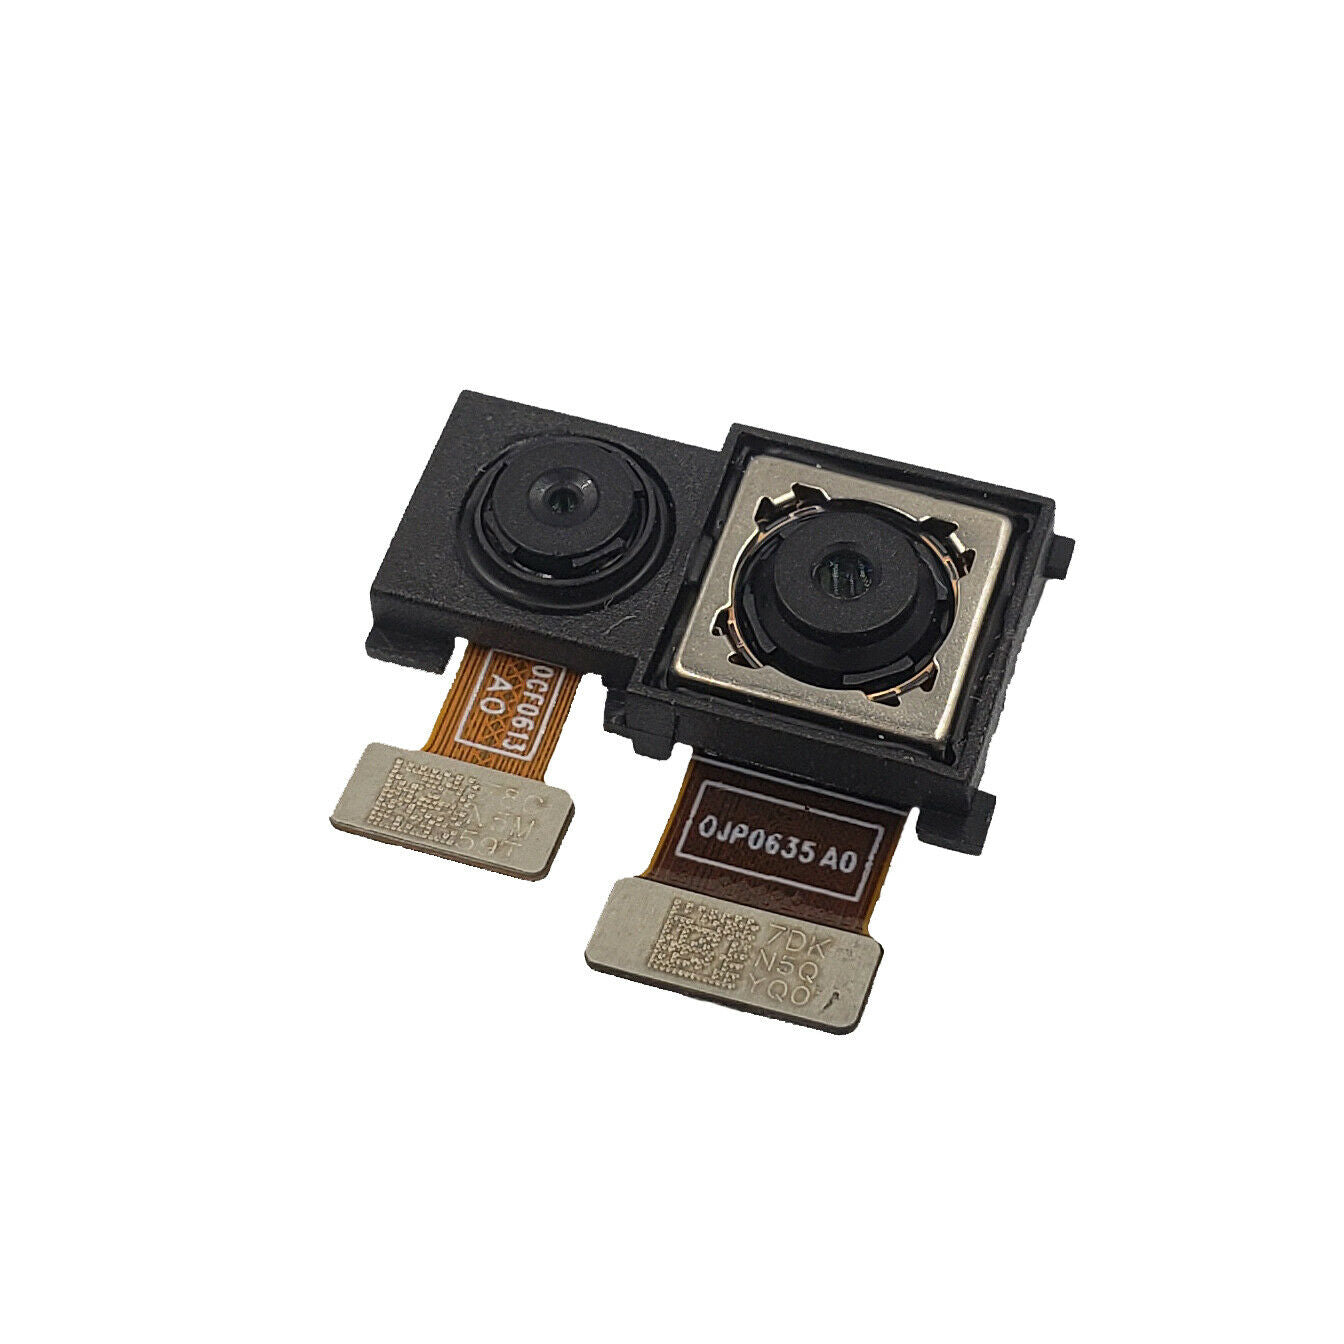 Huawei P20 Lite Genuine Rear Main Camera Module for [product_price] - First Help Tech